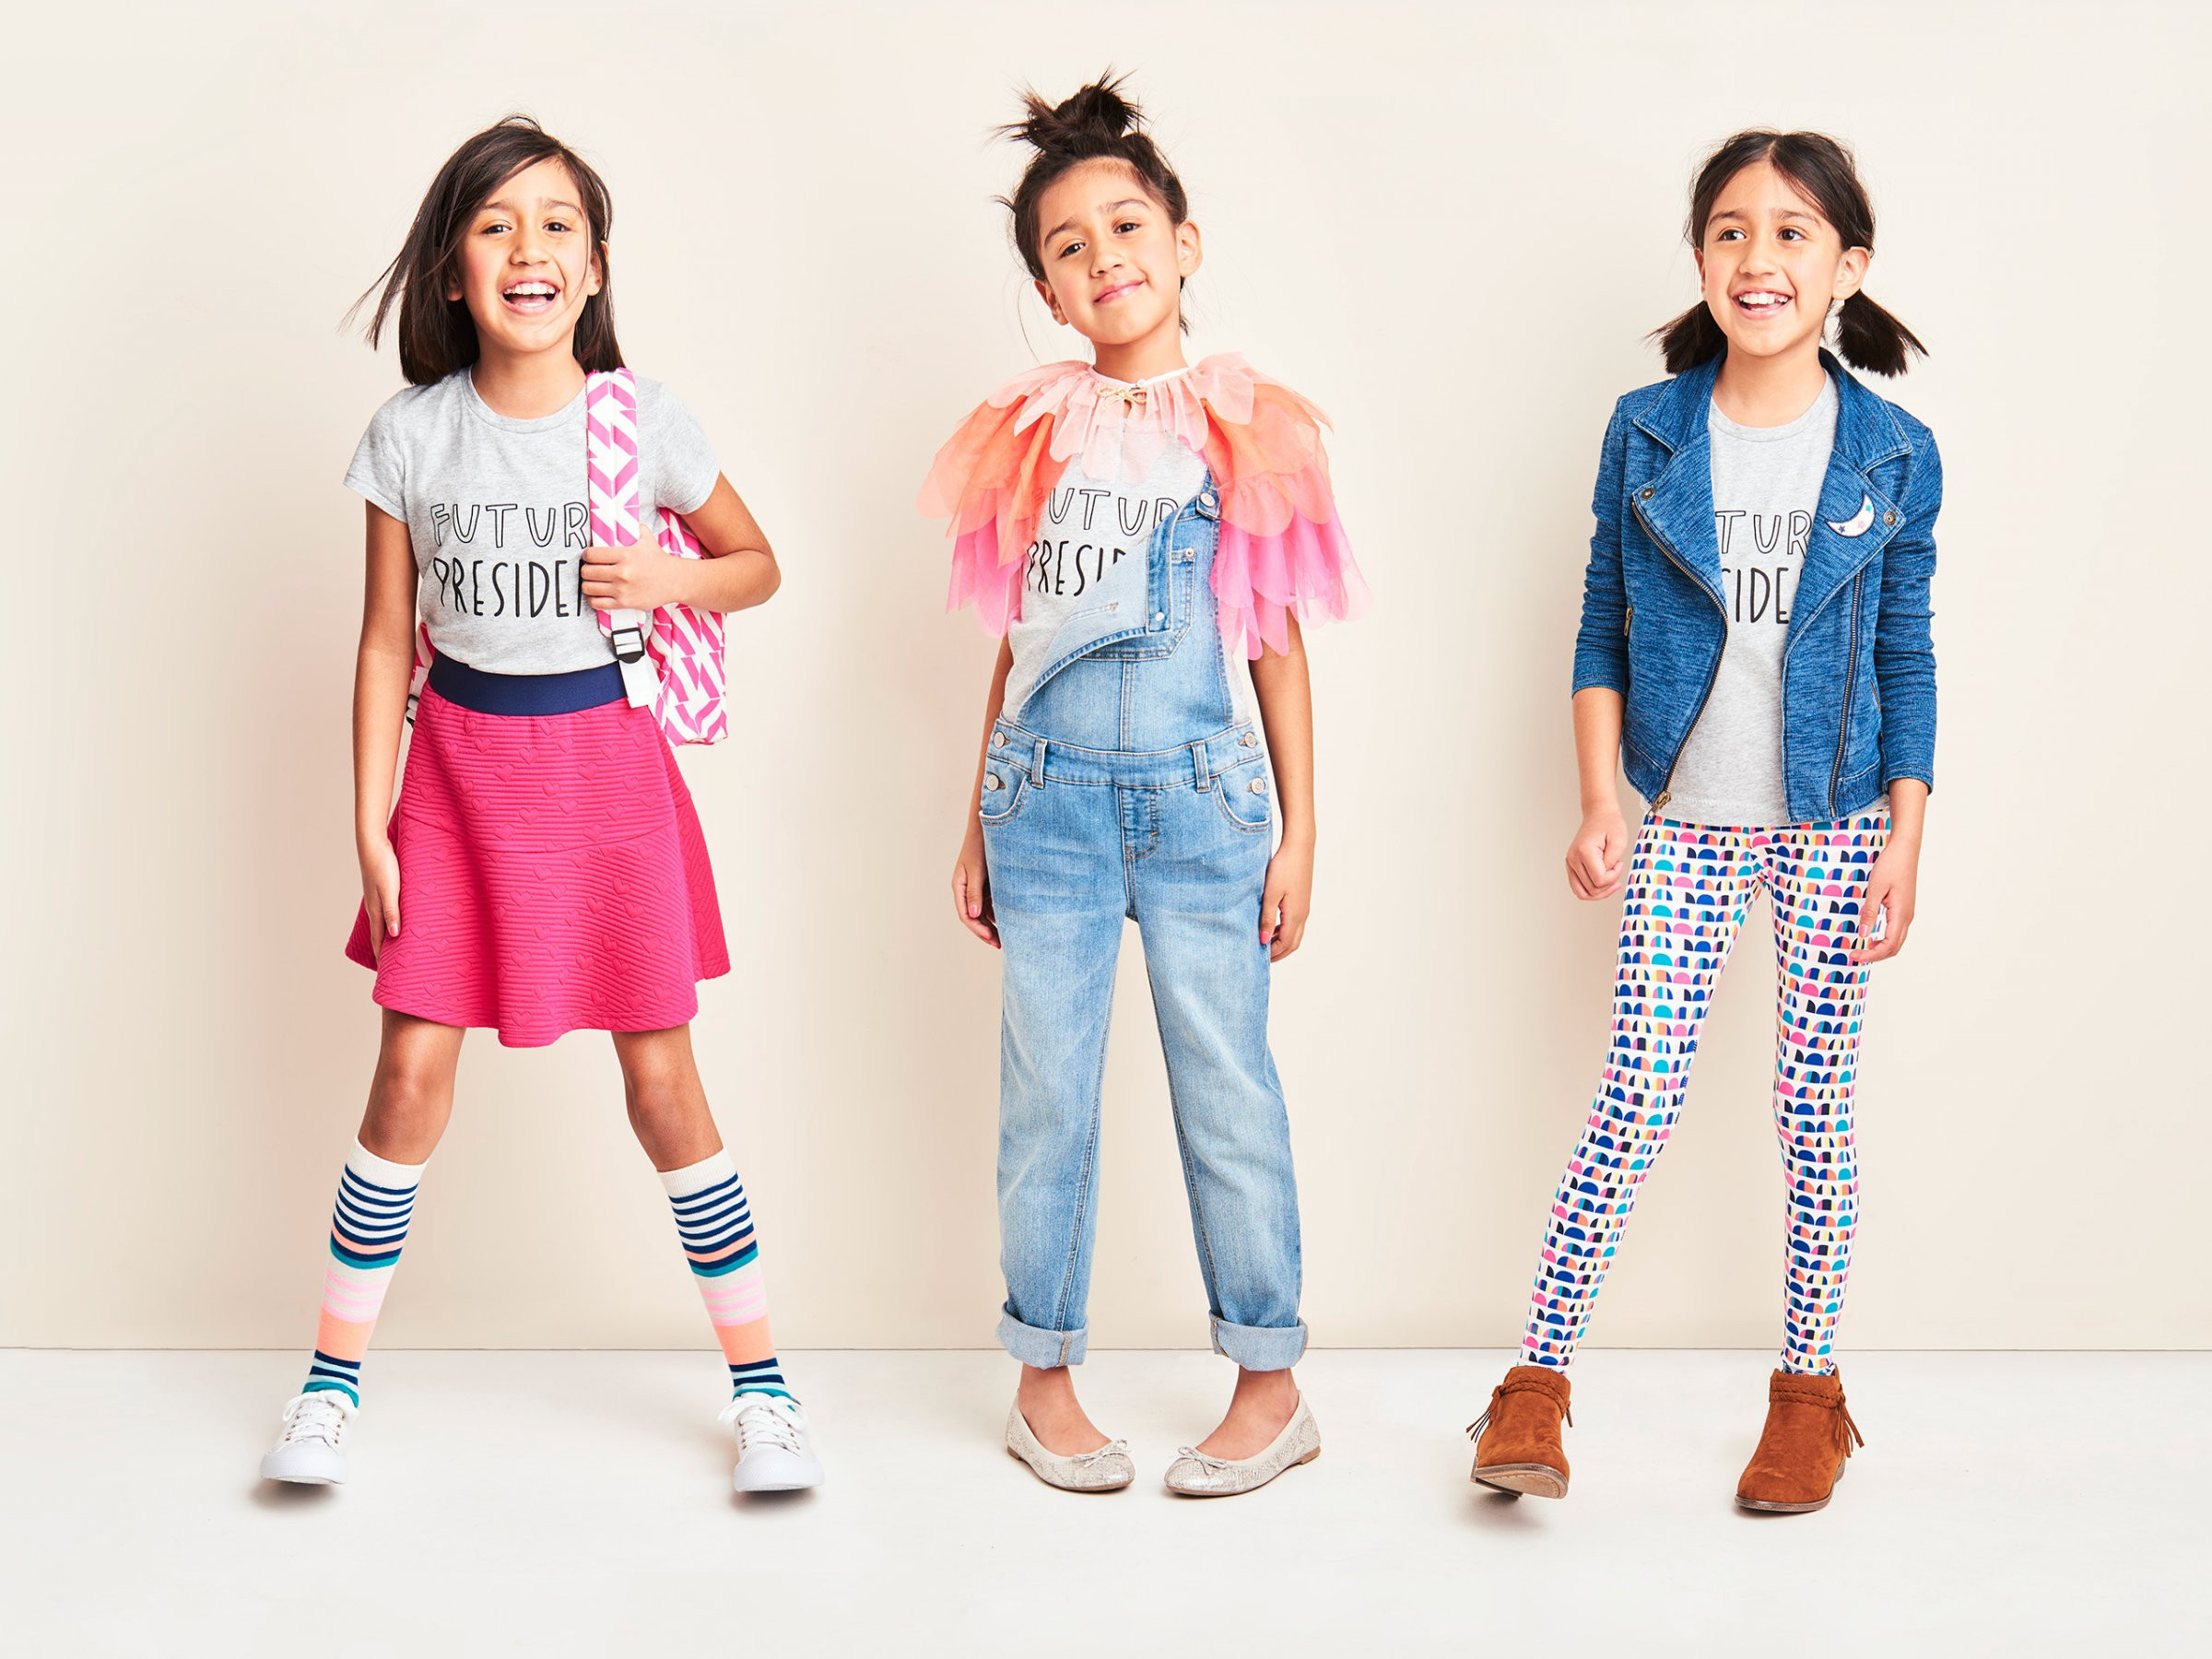 Kids Fashion Clothes
 Today in awesome Tar debuts new kids clothing line